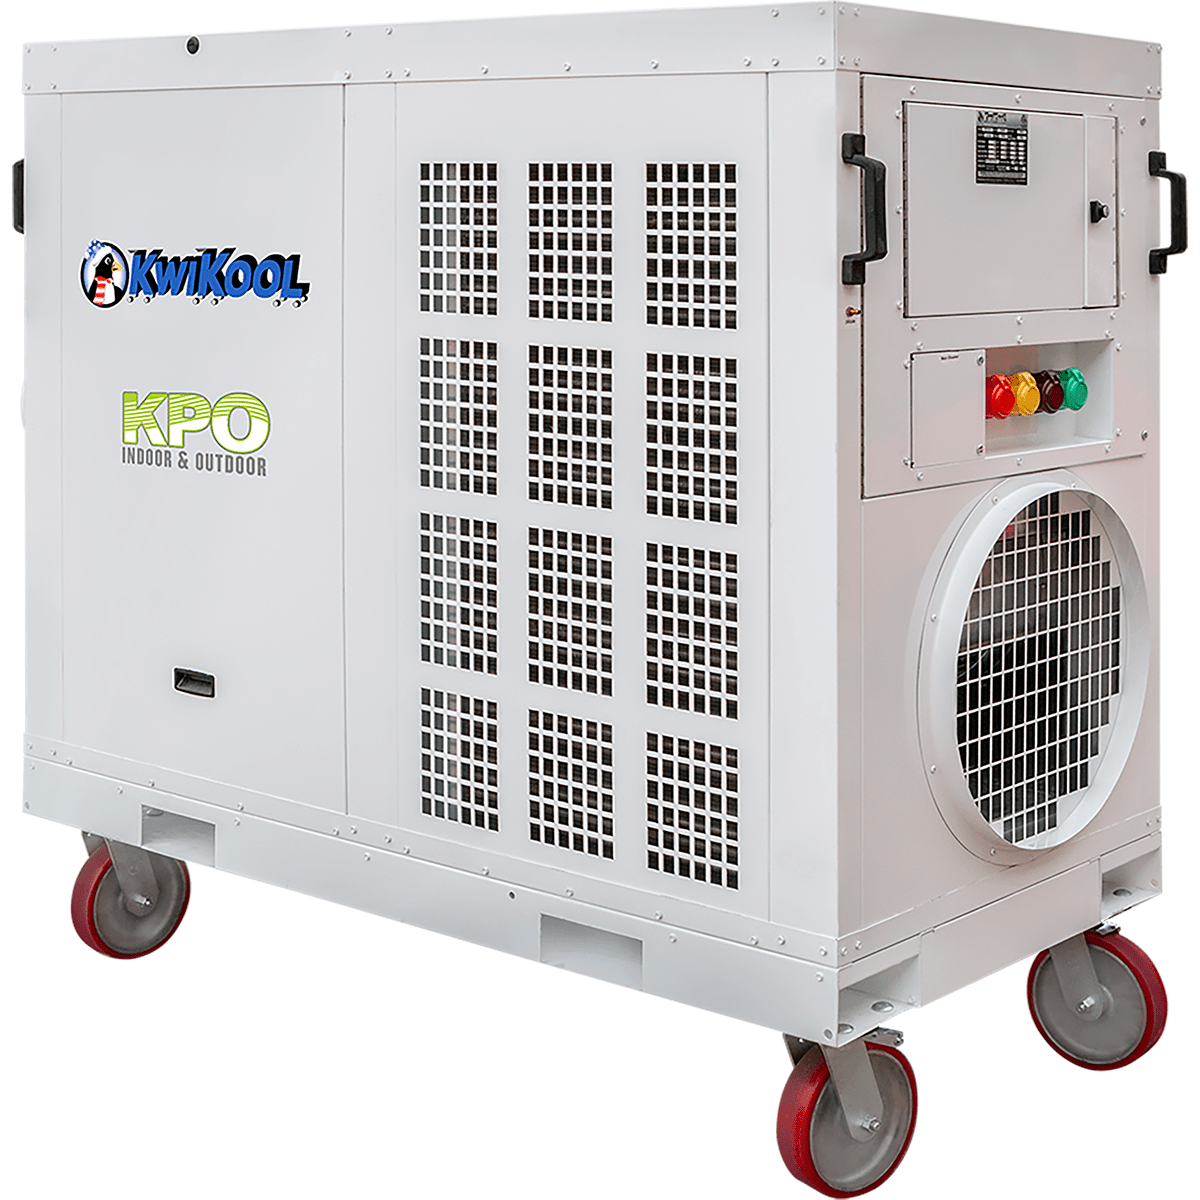 KwiKool 135,000 BTU 440-460V Indoor/Outdoor Commercial Portable AC - Cooling Only